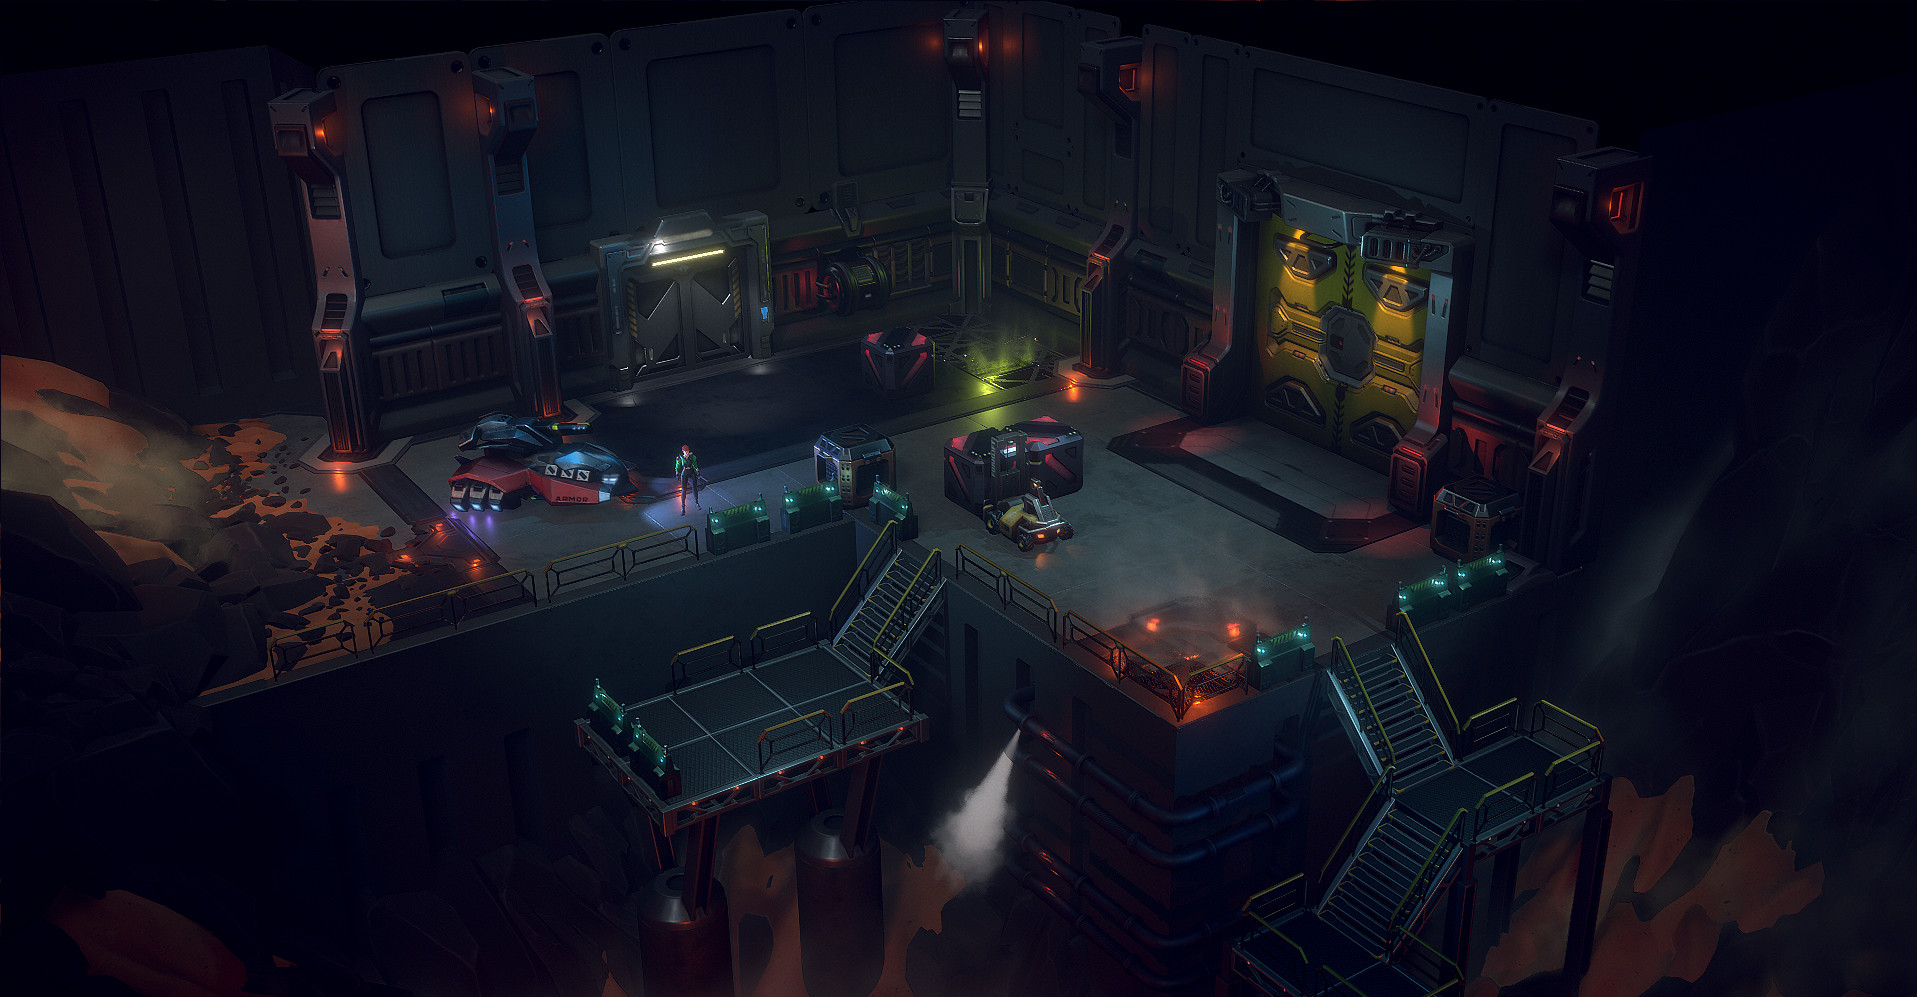 An image from Cyber Knights: Flashpoint showing an isometric view of a cyberpunk loading dock landscape.